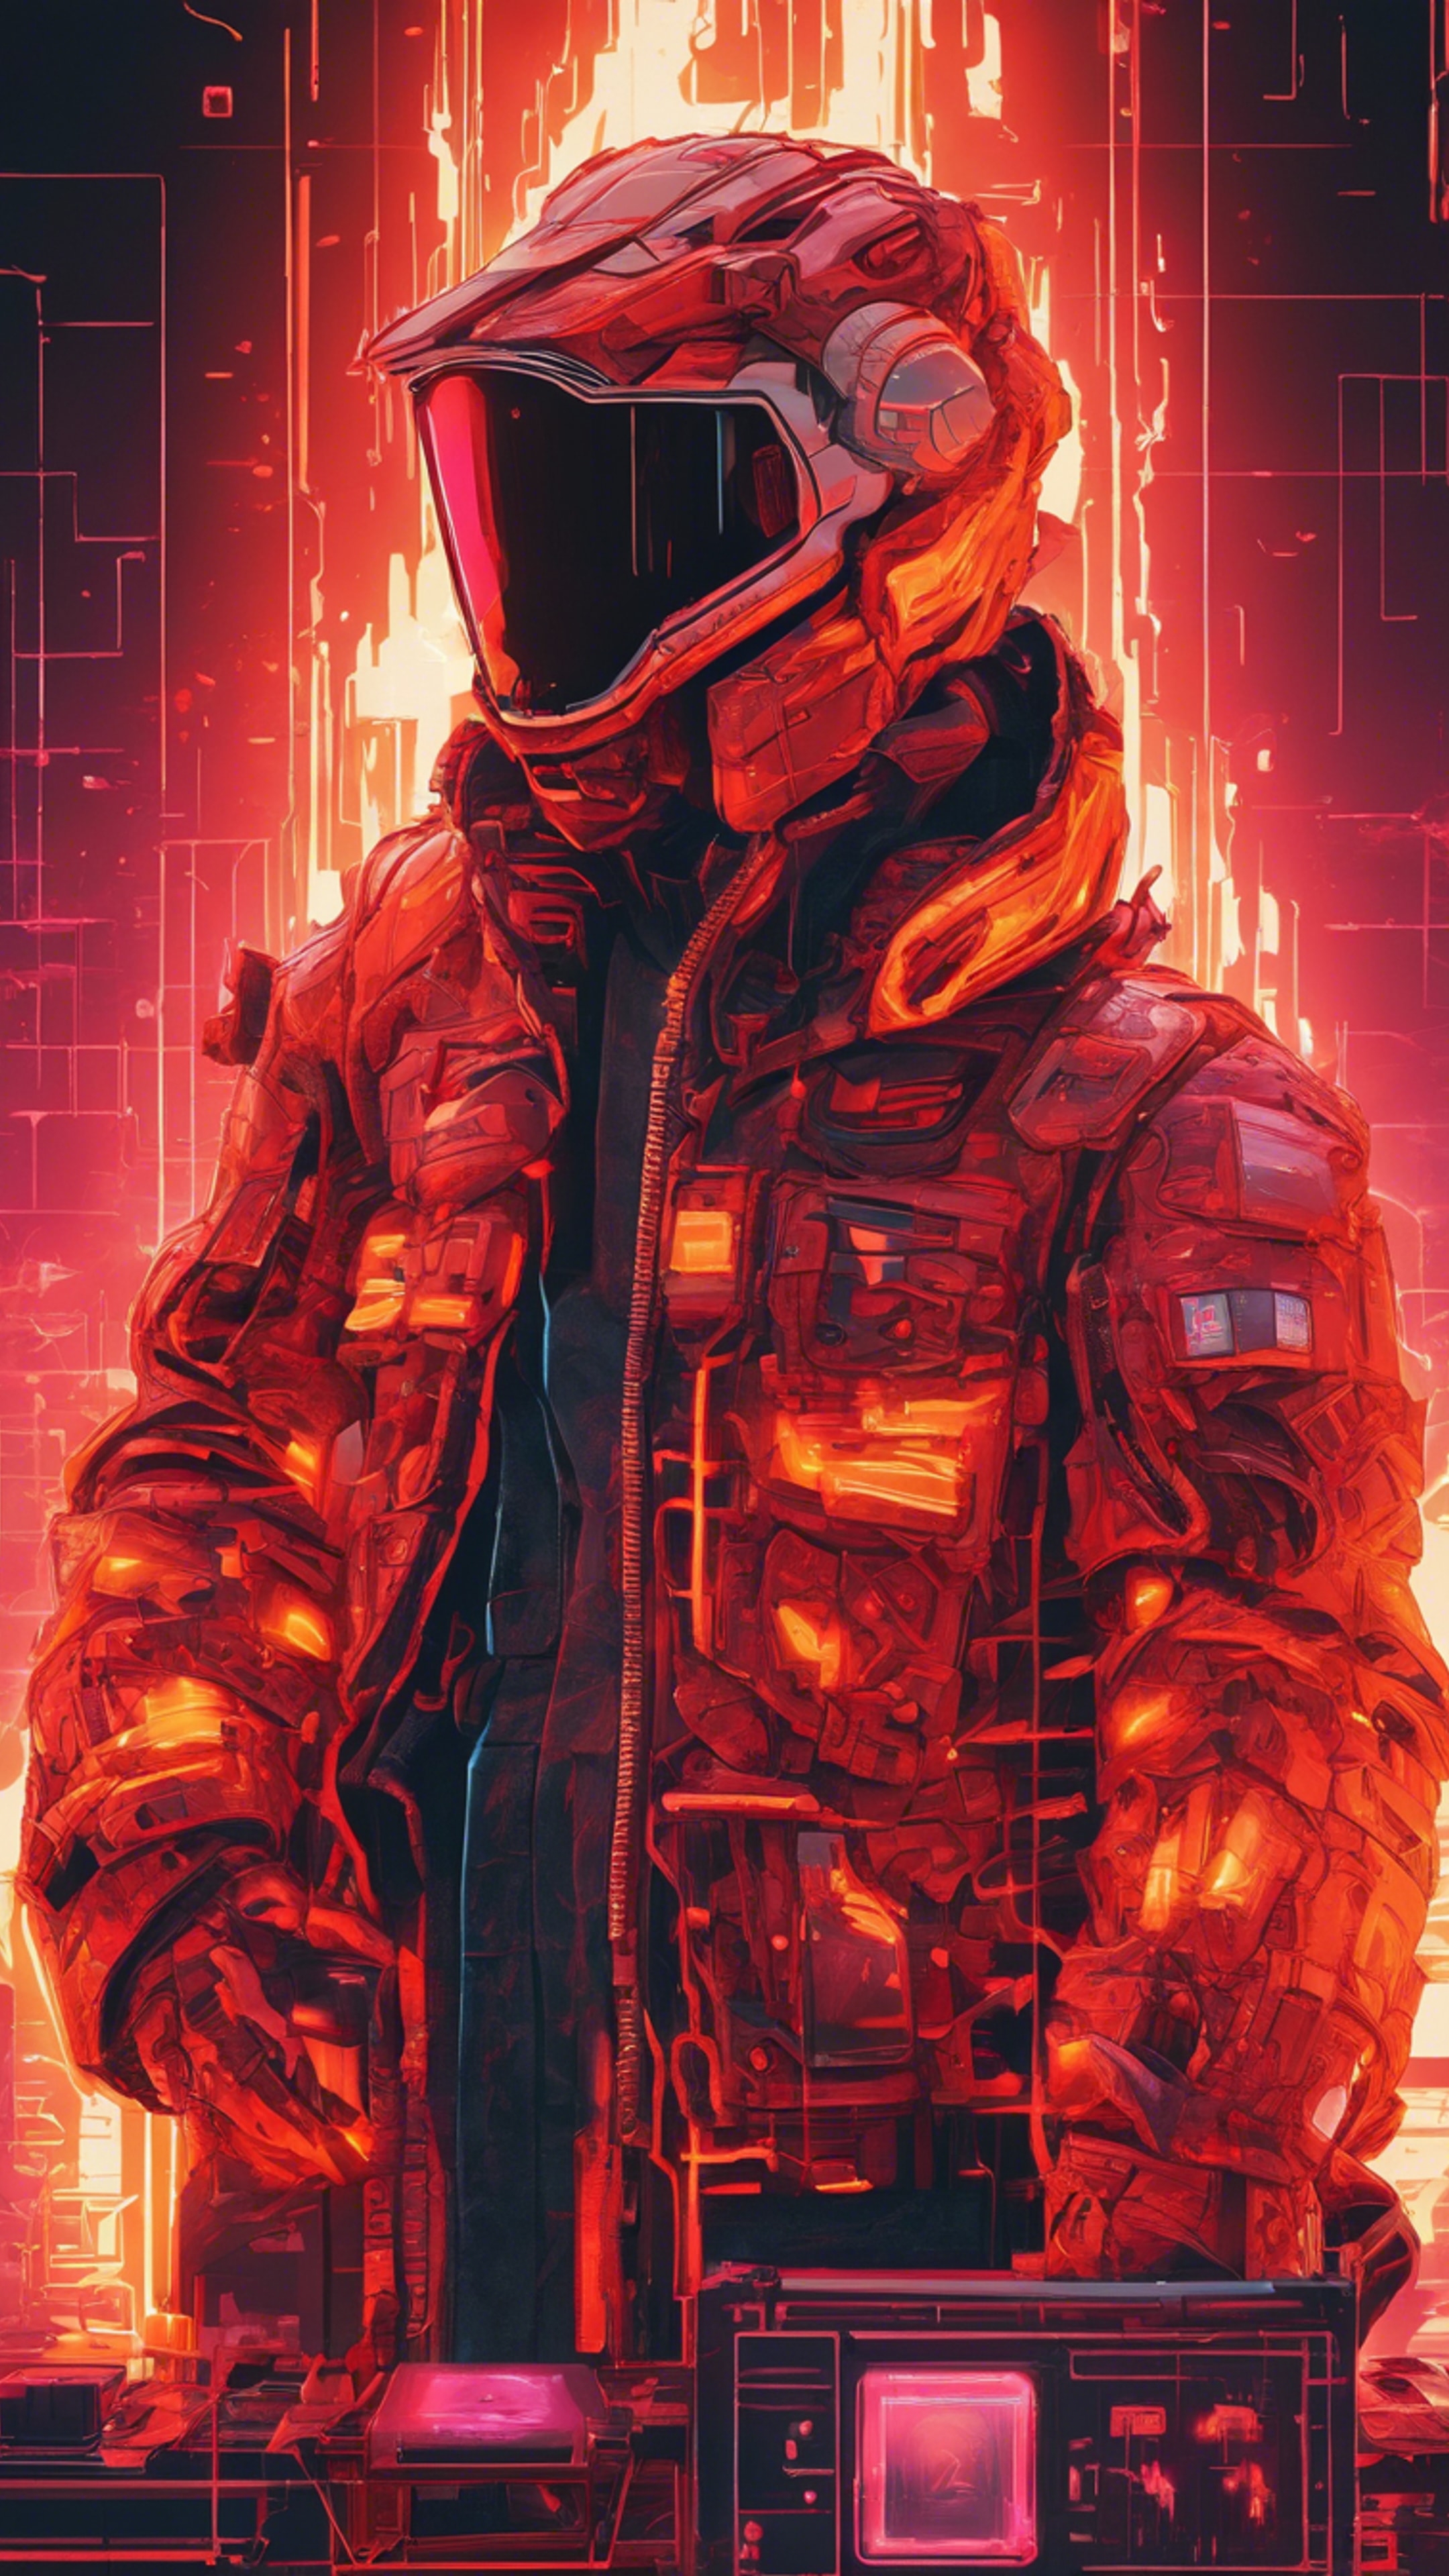 A stunning artwork of red and orange pixelated fire representing the fierce passion of gaming. วอลล์เปเปอร์[8d5607d360bb44738828]